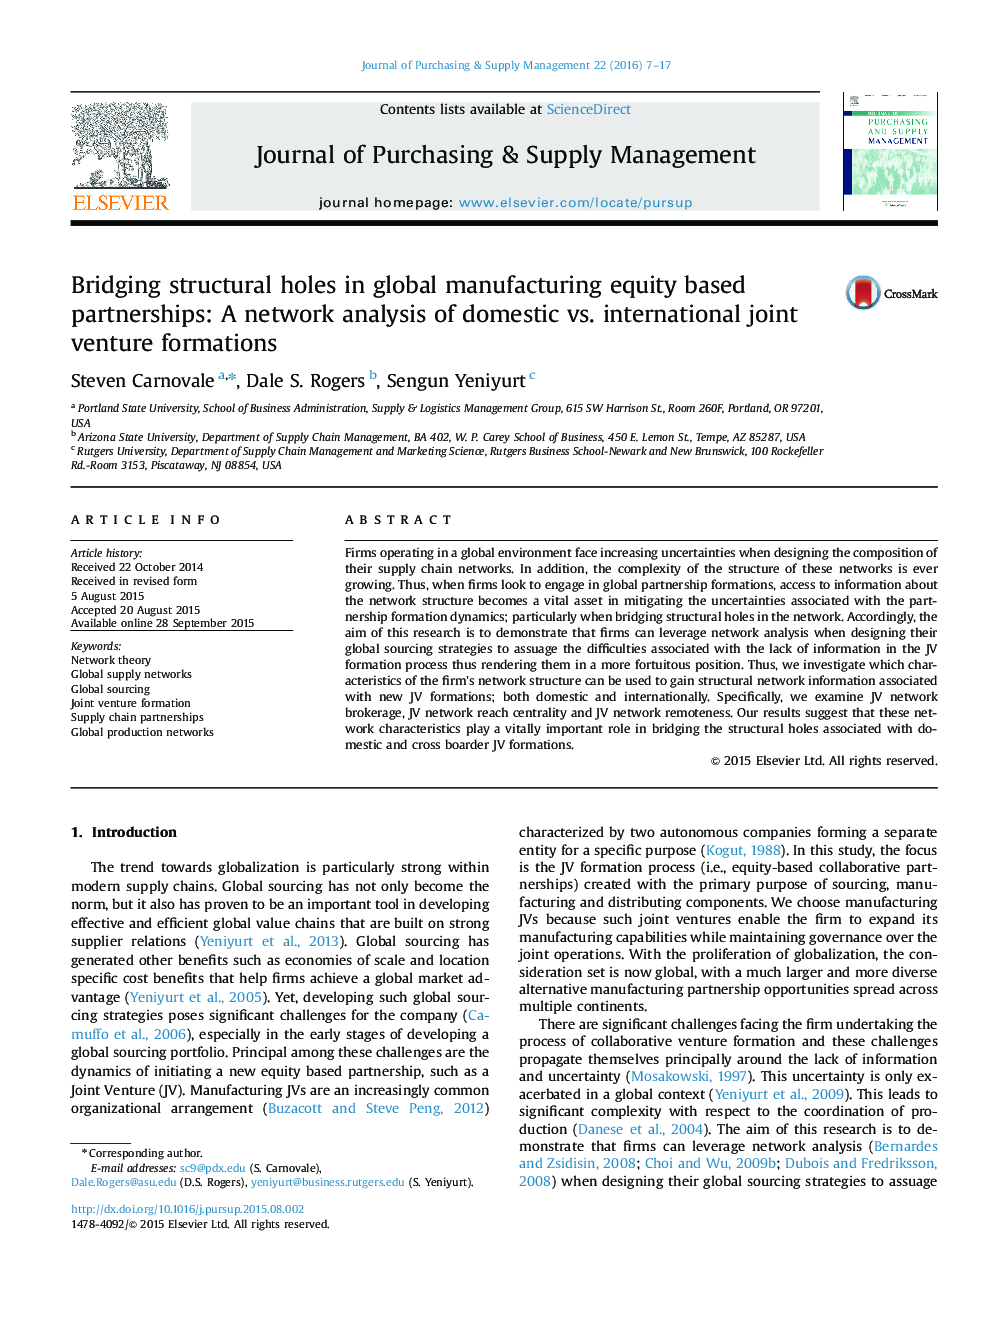 Bridging structural holes in global manufacturing equity based partnerships: A network analysis of domestic vs. international joint venture formations